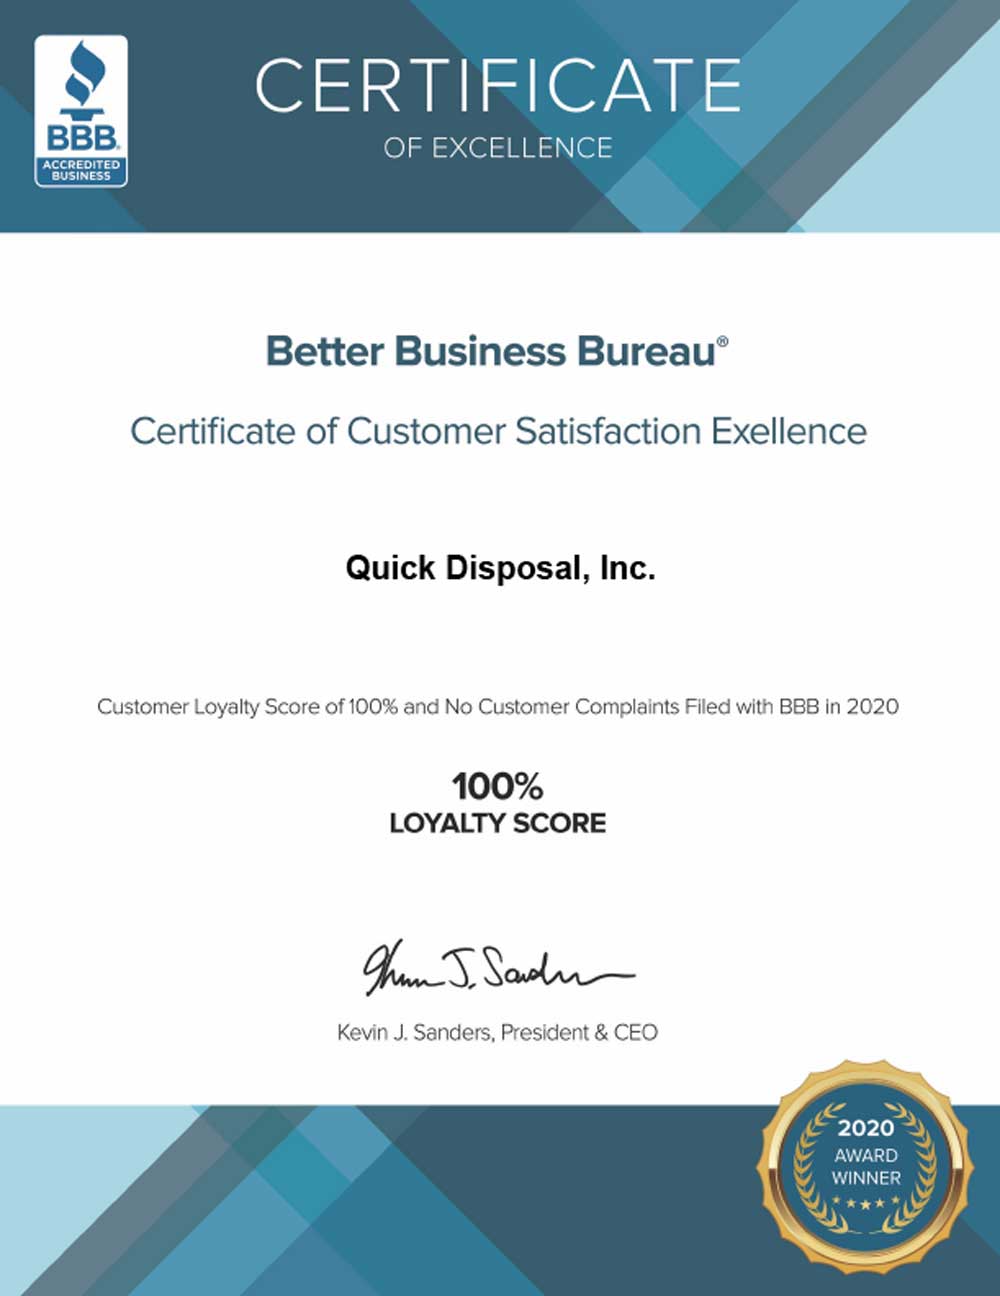 alt tagCertificate Excellence BBB Quick Disposal